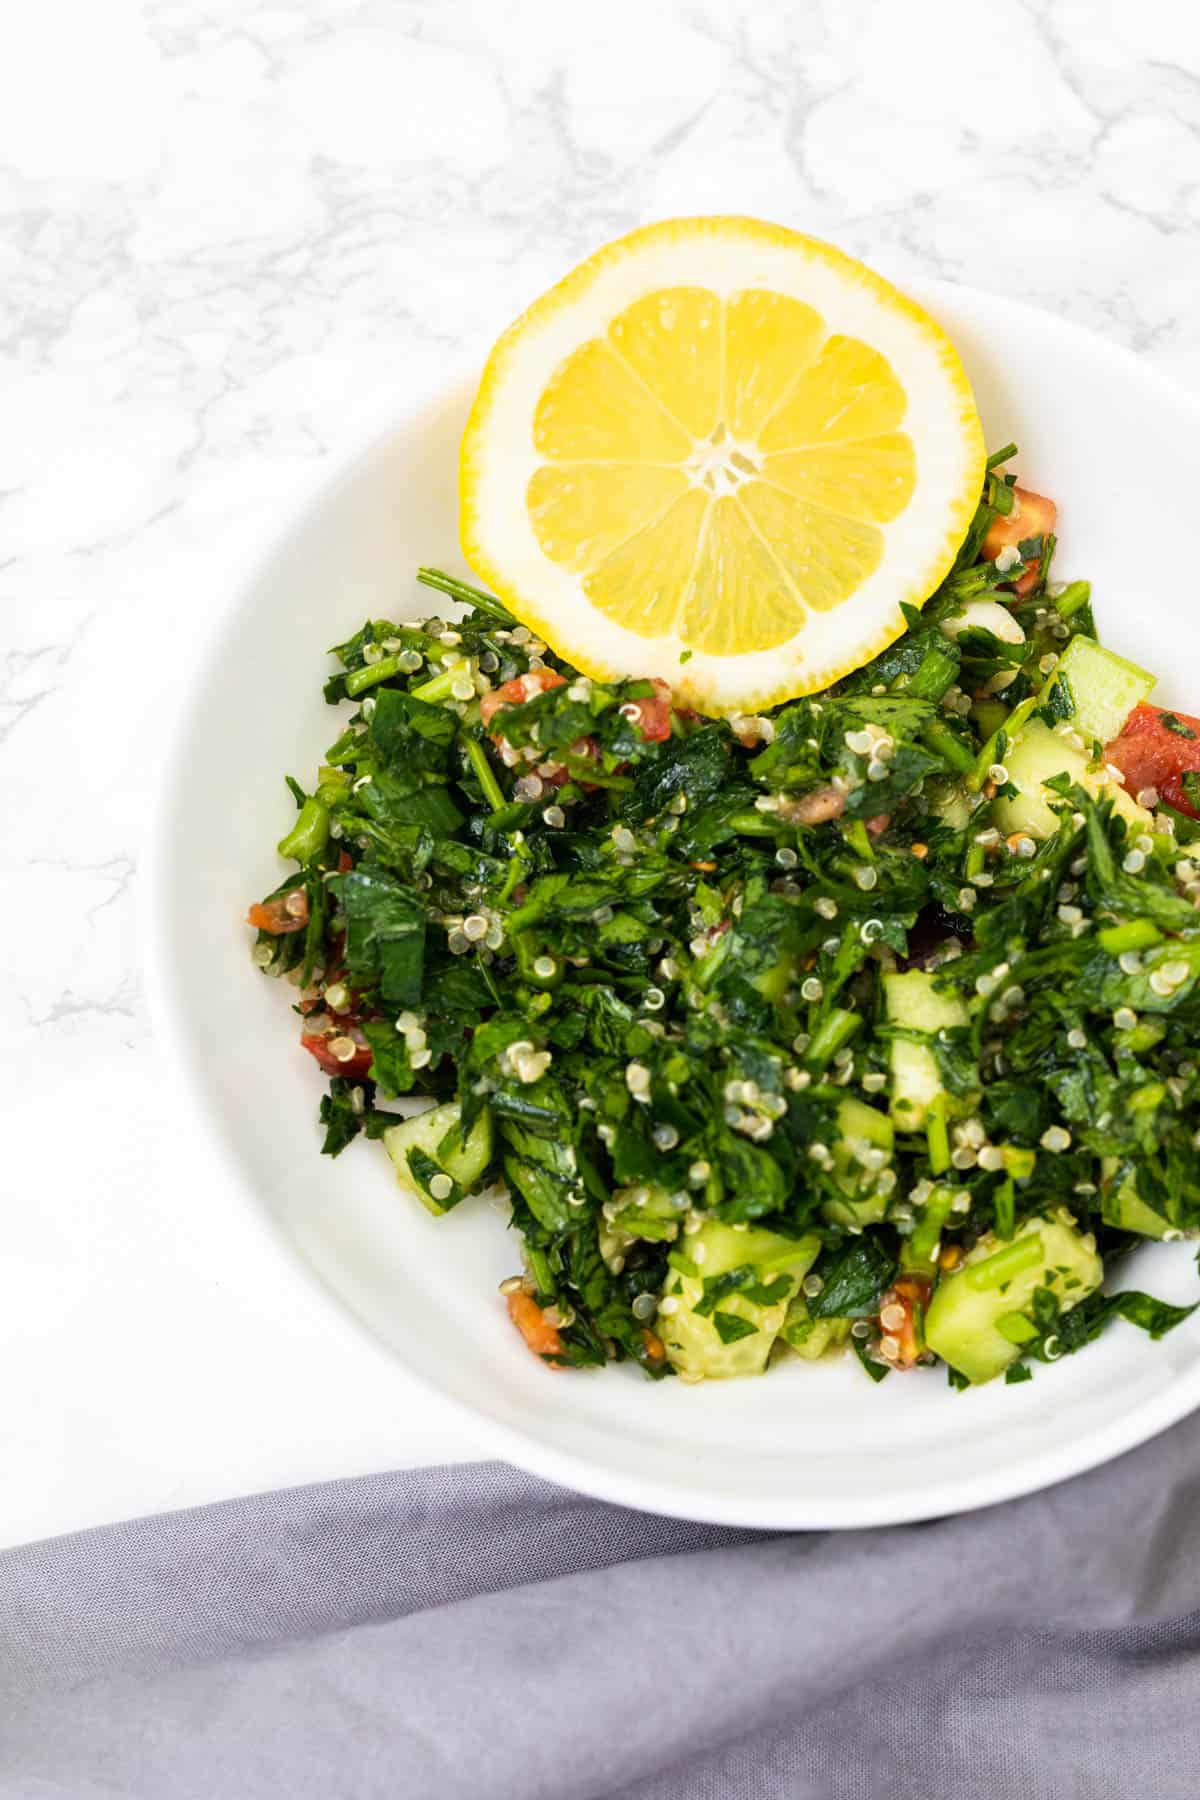 Bowl of quinoa tabouli with lemon slice and gray cloth napkin on white marble counter